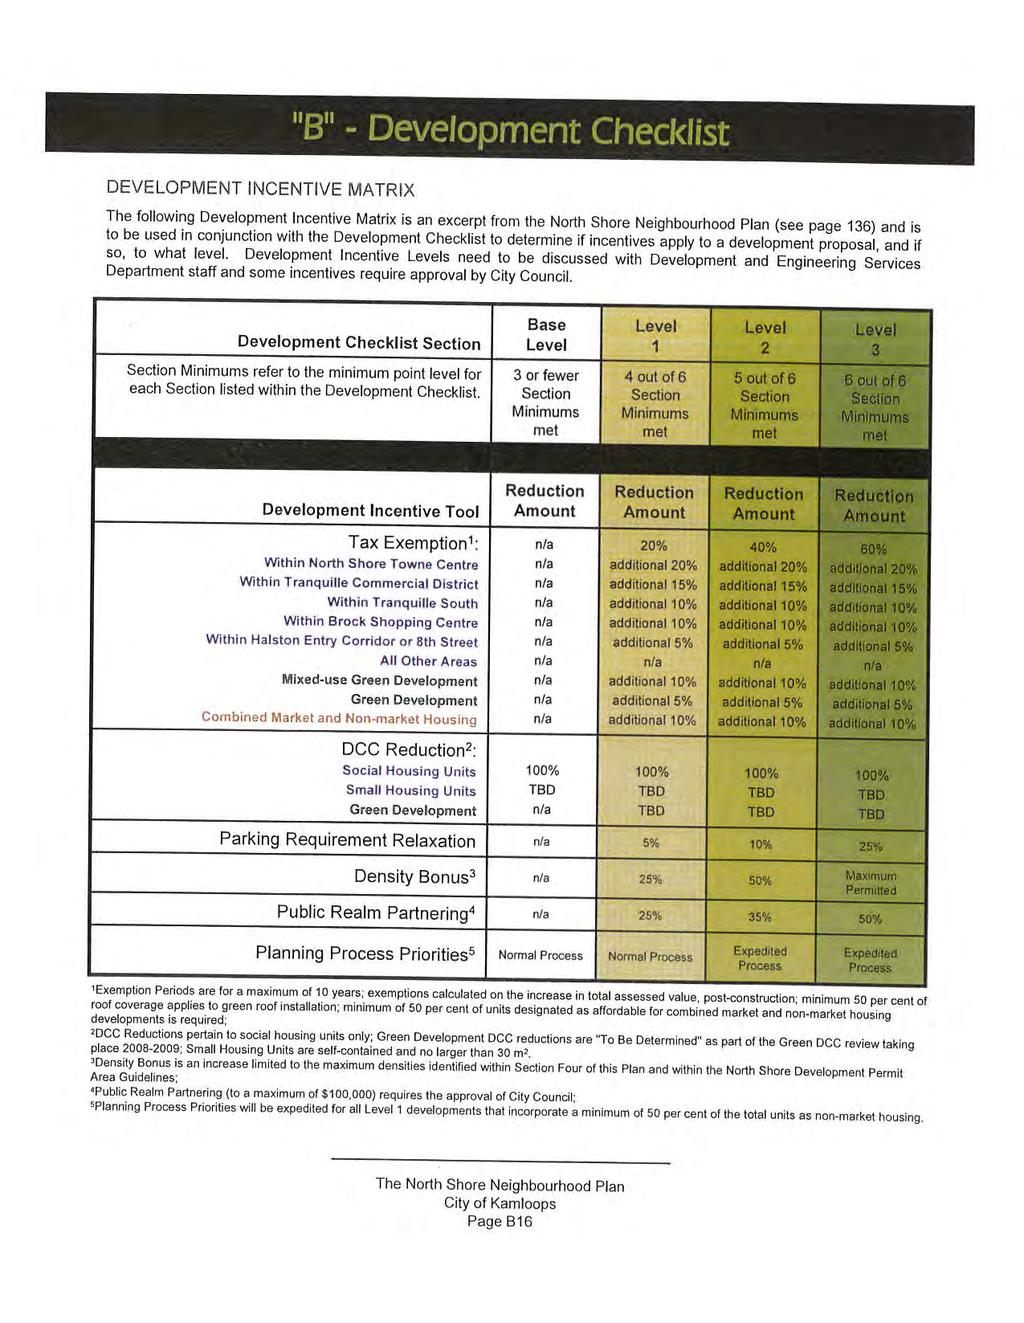 8 - Development Checl<list DEVEL OPMENT INCENTIVE MATRIX The following Development Incentive M atrix is an excerpt from the North Shore Neighbourhood Plan (see page 36) and is to be used in